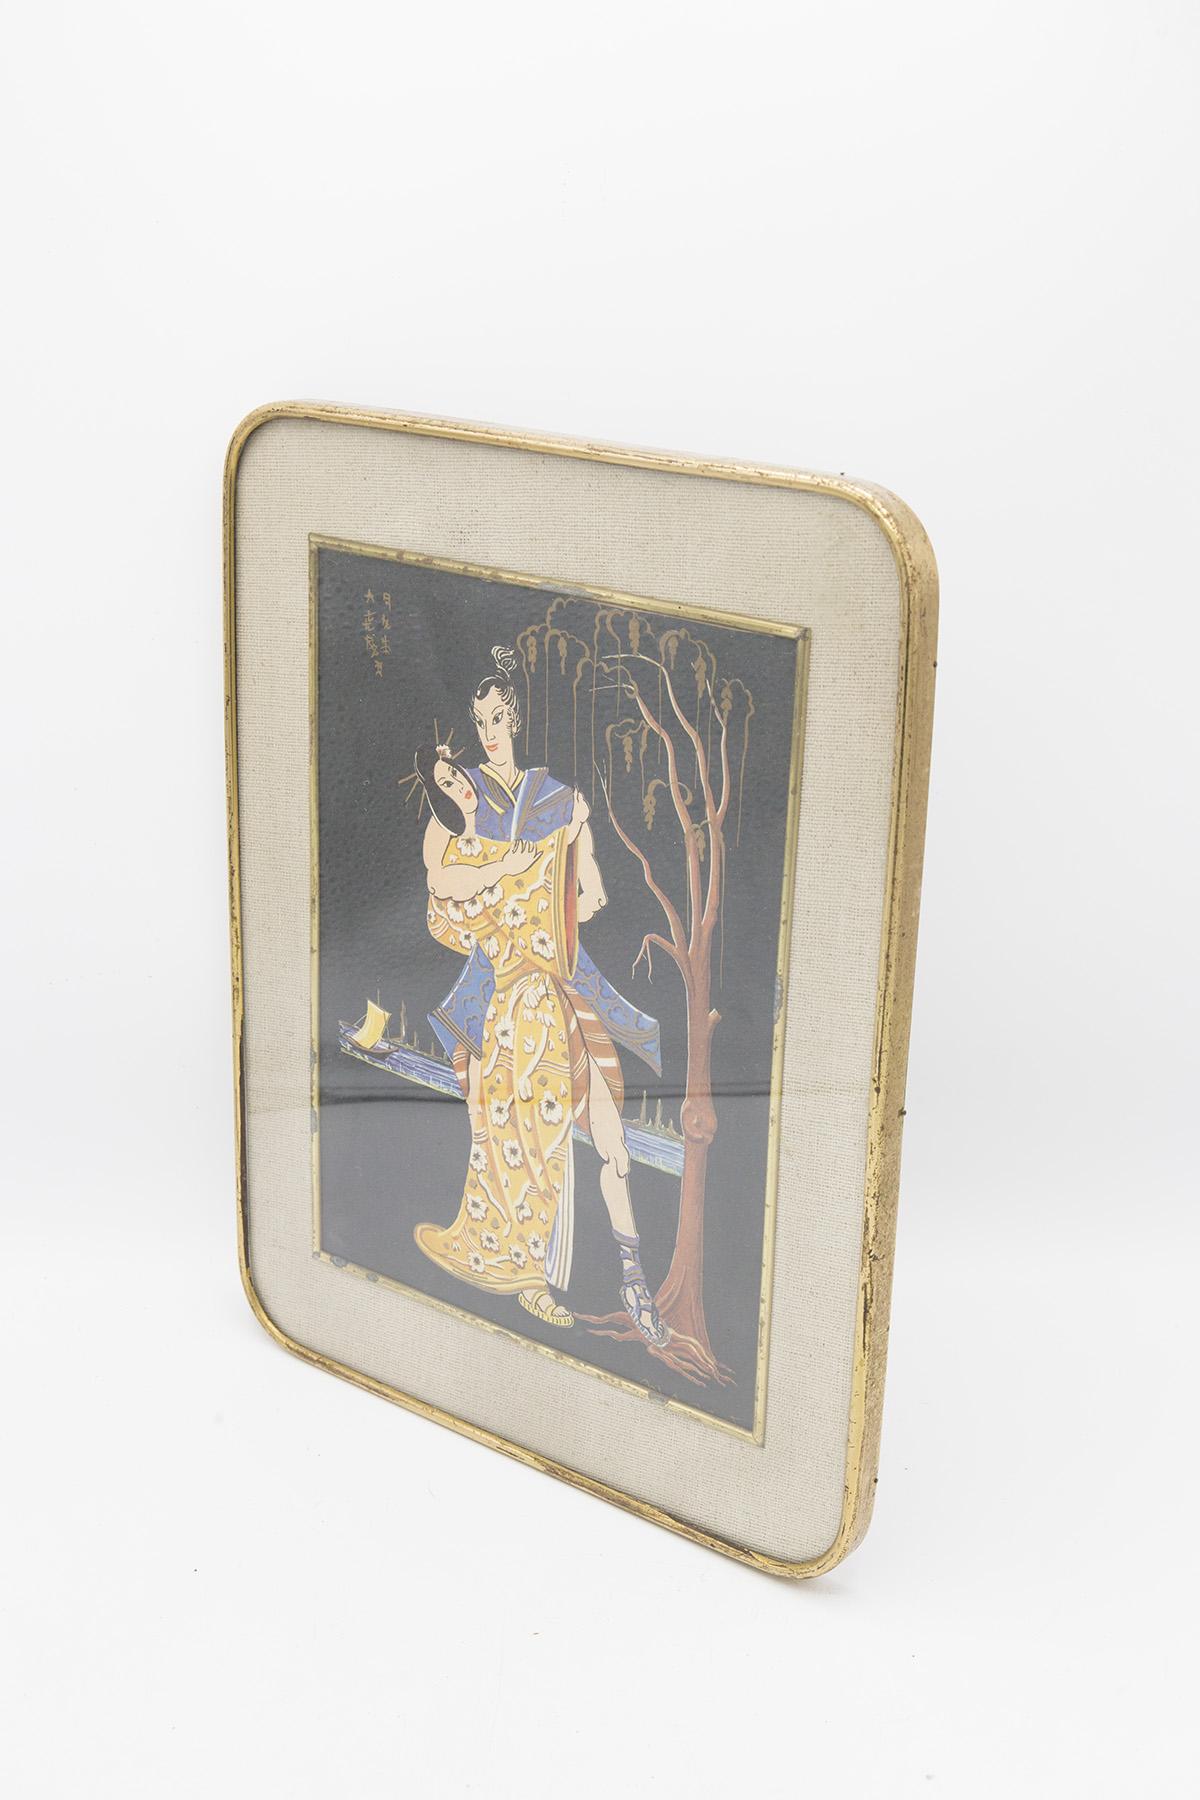 Anglo-Japanese Antique Japanese Painting Framed on Jute 'Lovers Dance' For Sale